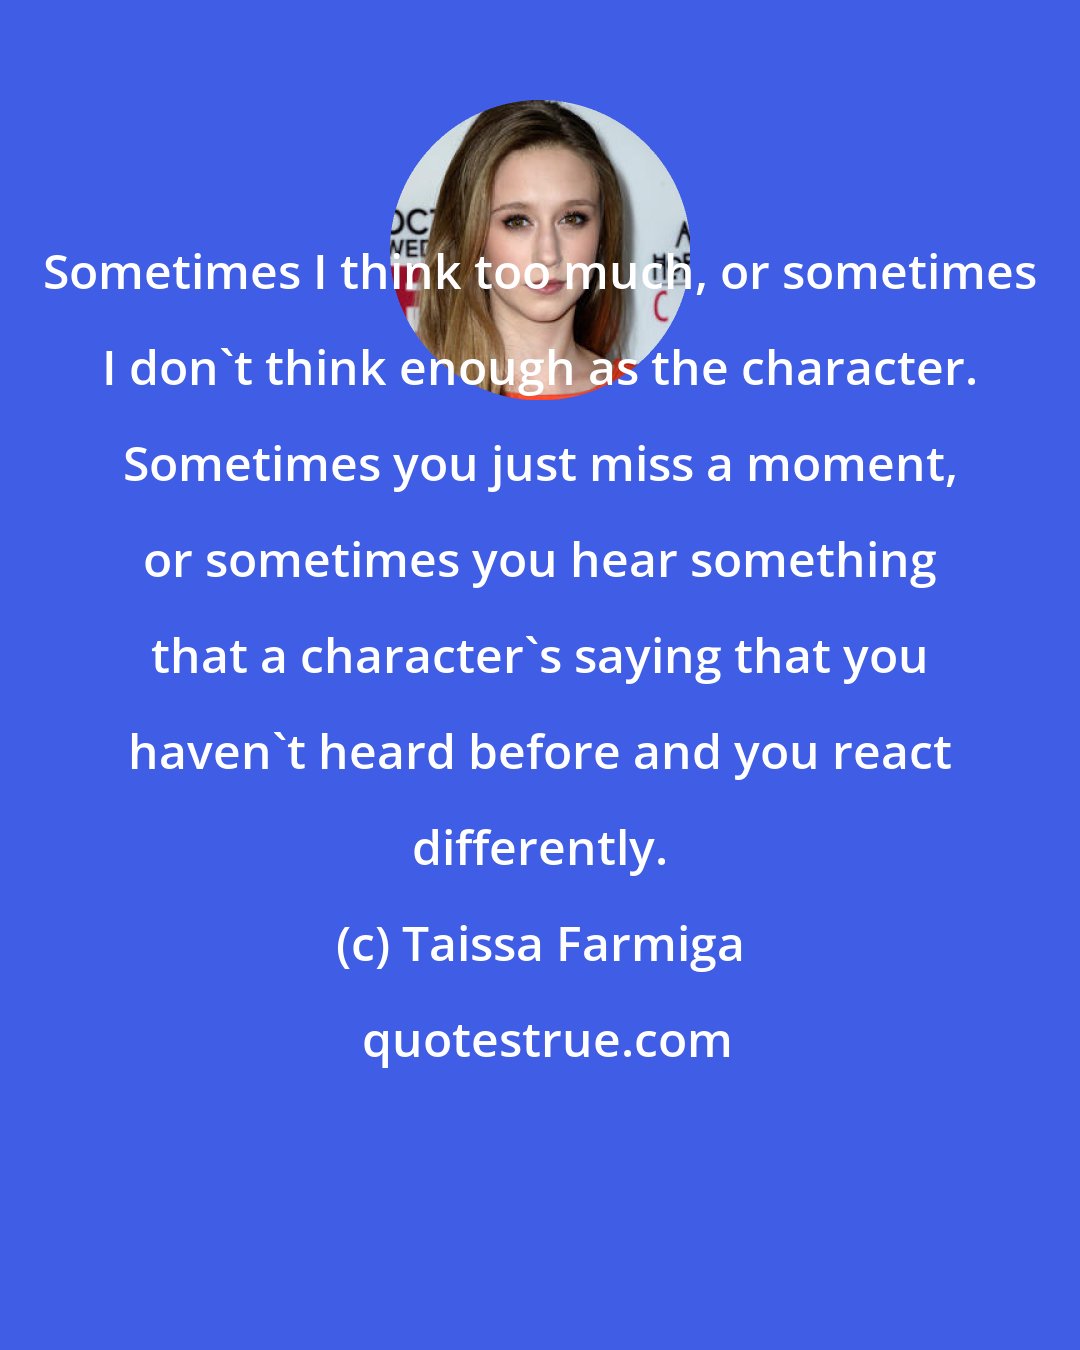 Taissa Farmiga: Sometimes I think too much, or sometimes I don't think enough as the character. Sometimes you just miss a moment, or sometimes you hear something that a character's saying that you haven't heard before and you react differently.